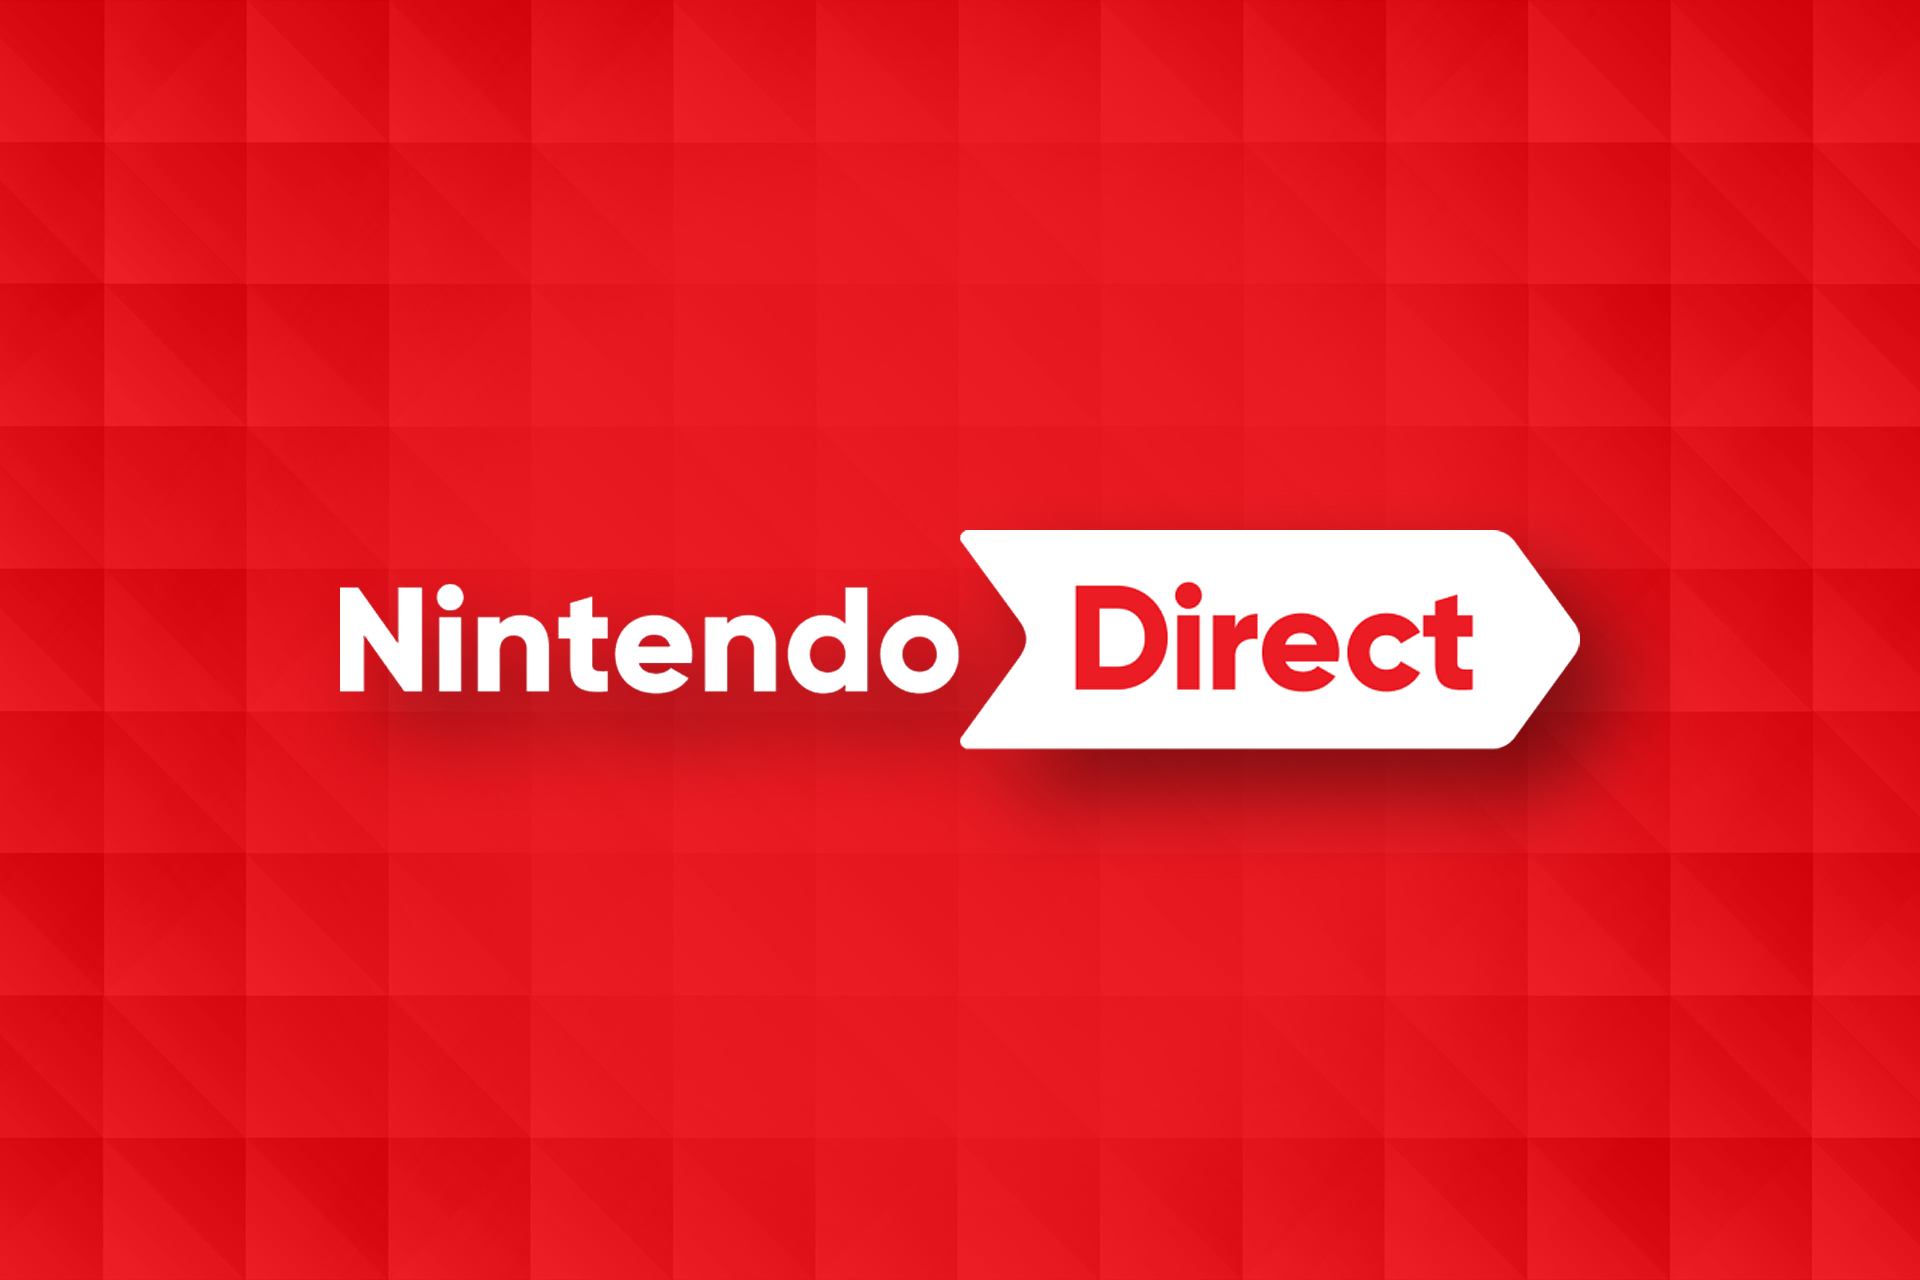 The Nintendo Direct logo on a checkered background